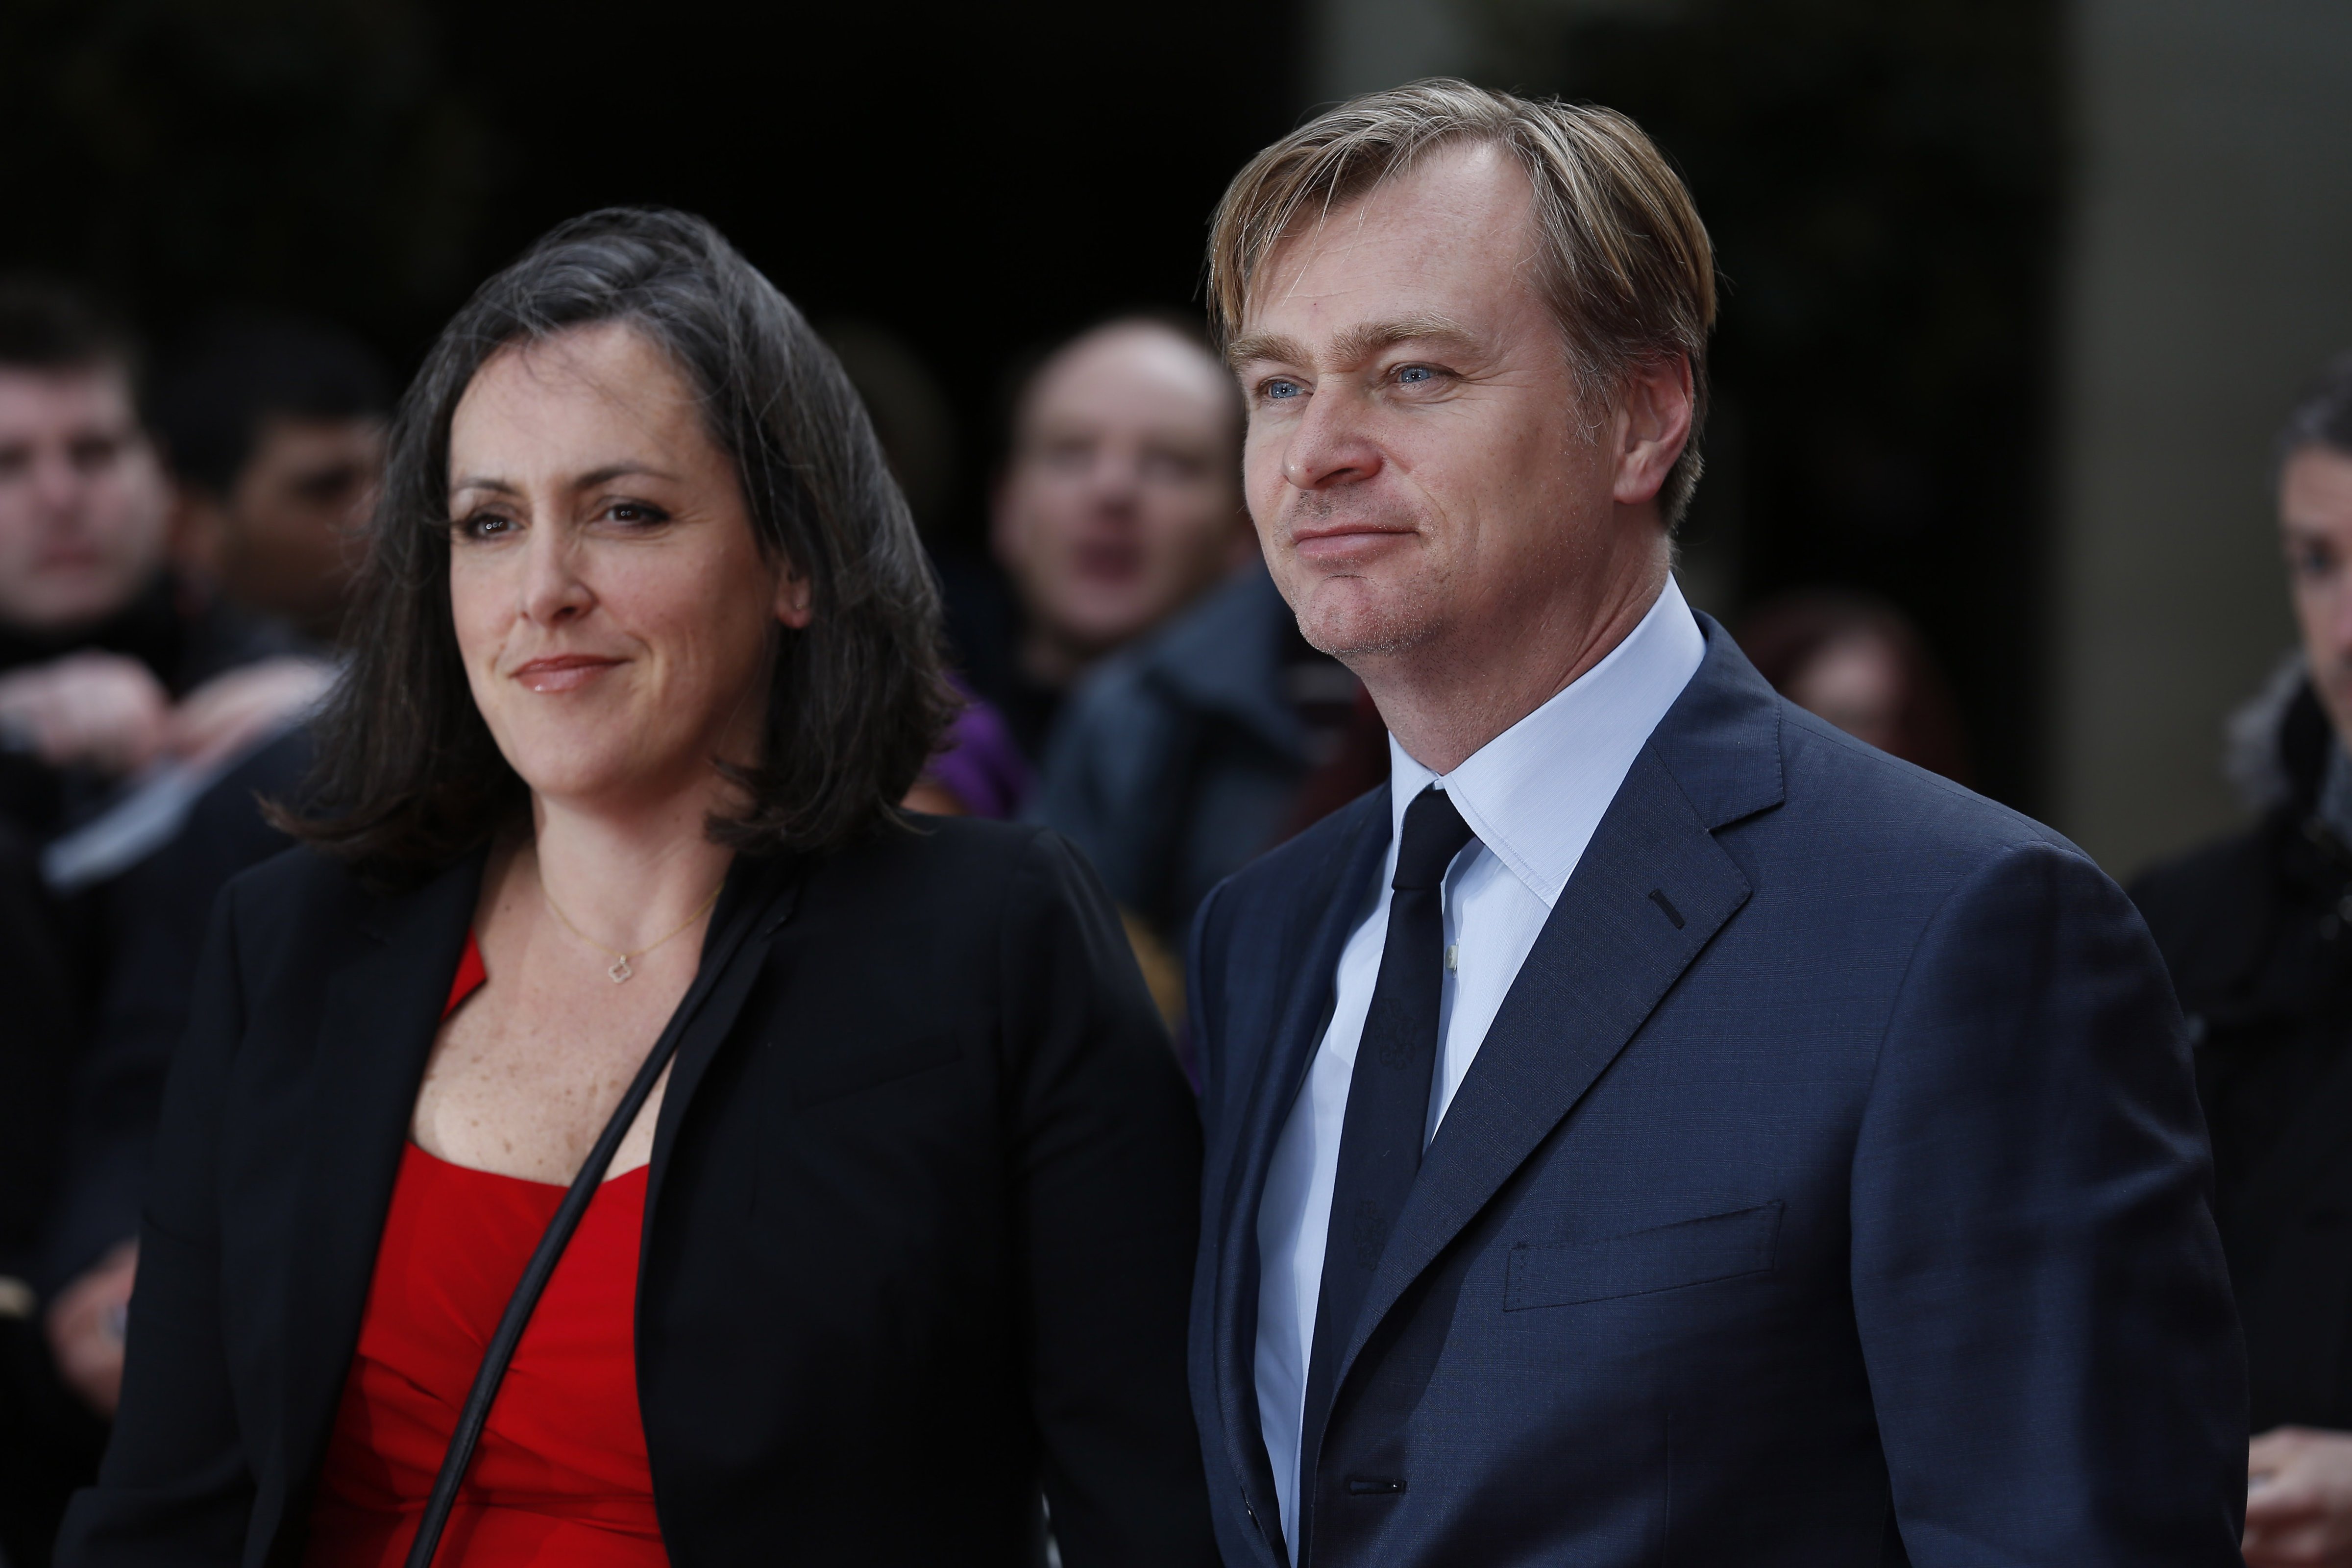 British director Christopher Nolan (R) and his wife, British film producer Emma Thomas pose for photographers as they arrive for the 2015 Empire Awards in central London on Mar. 29, 2015.